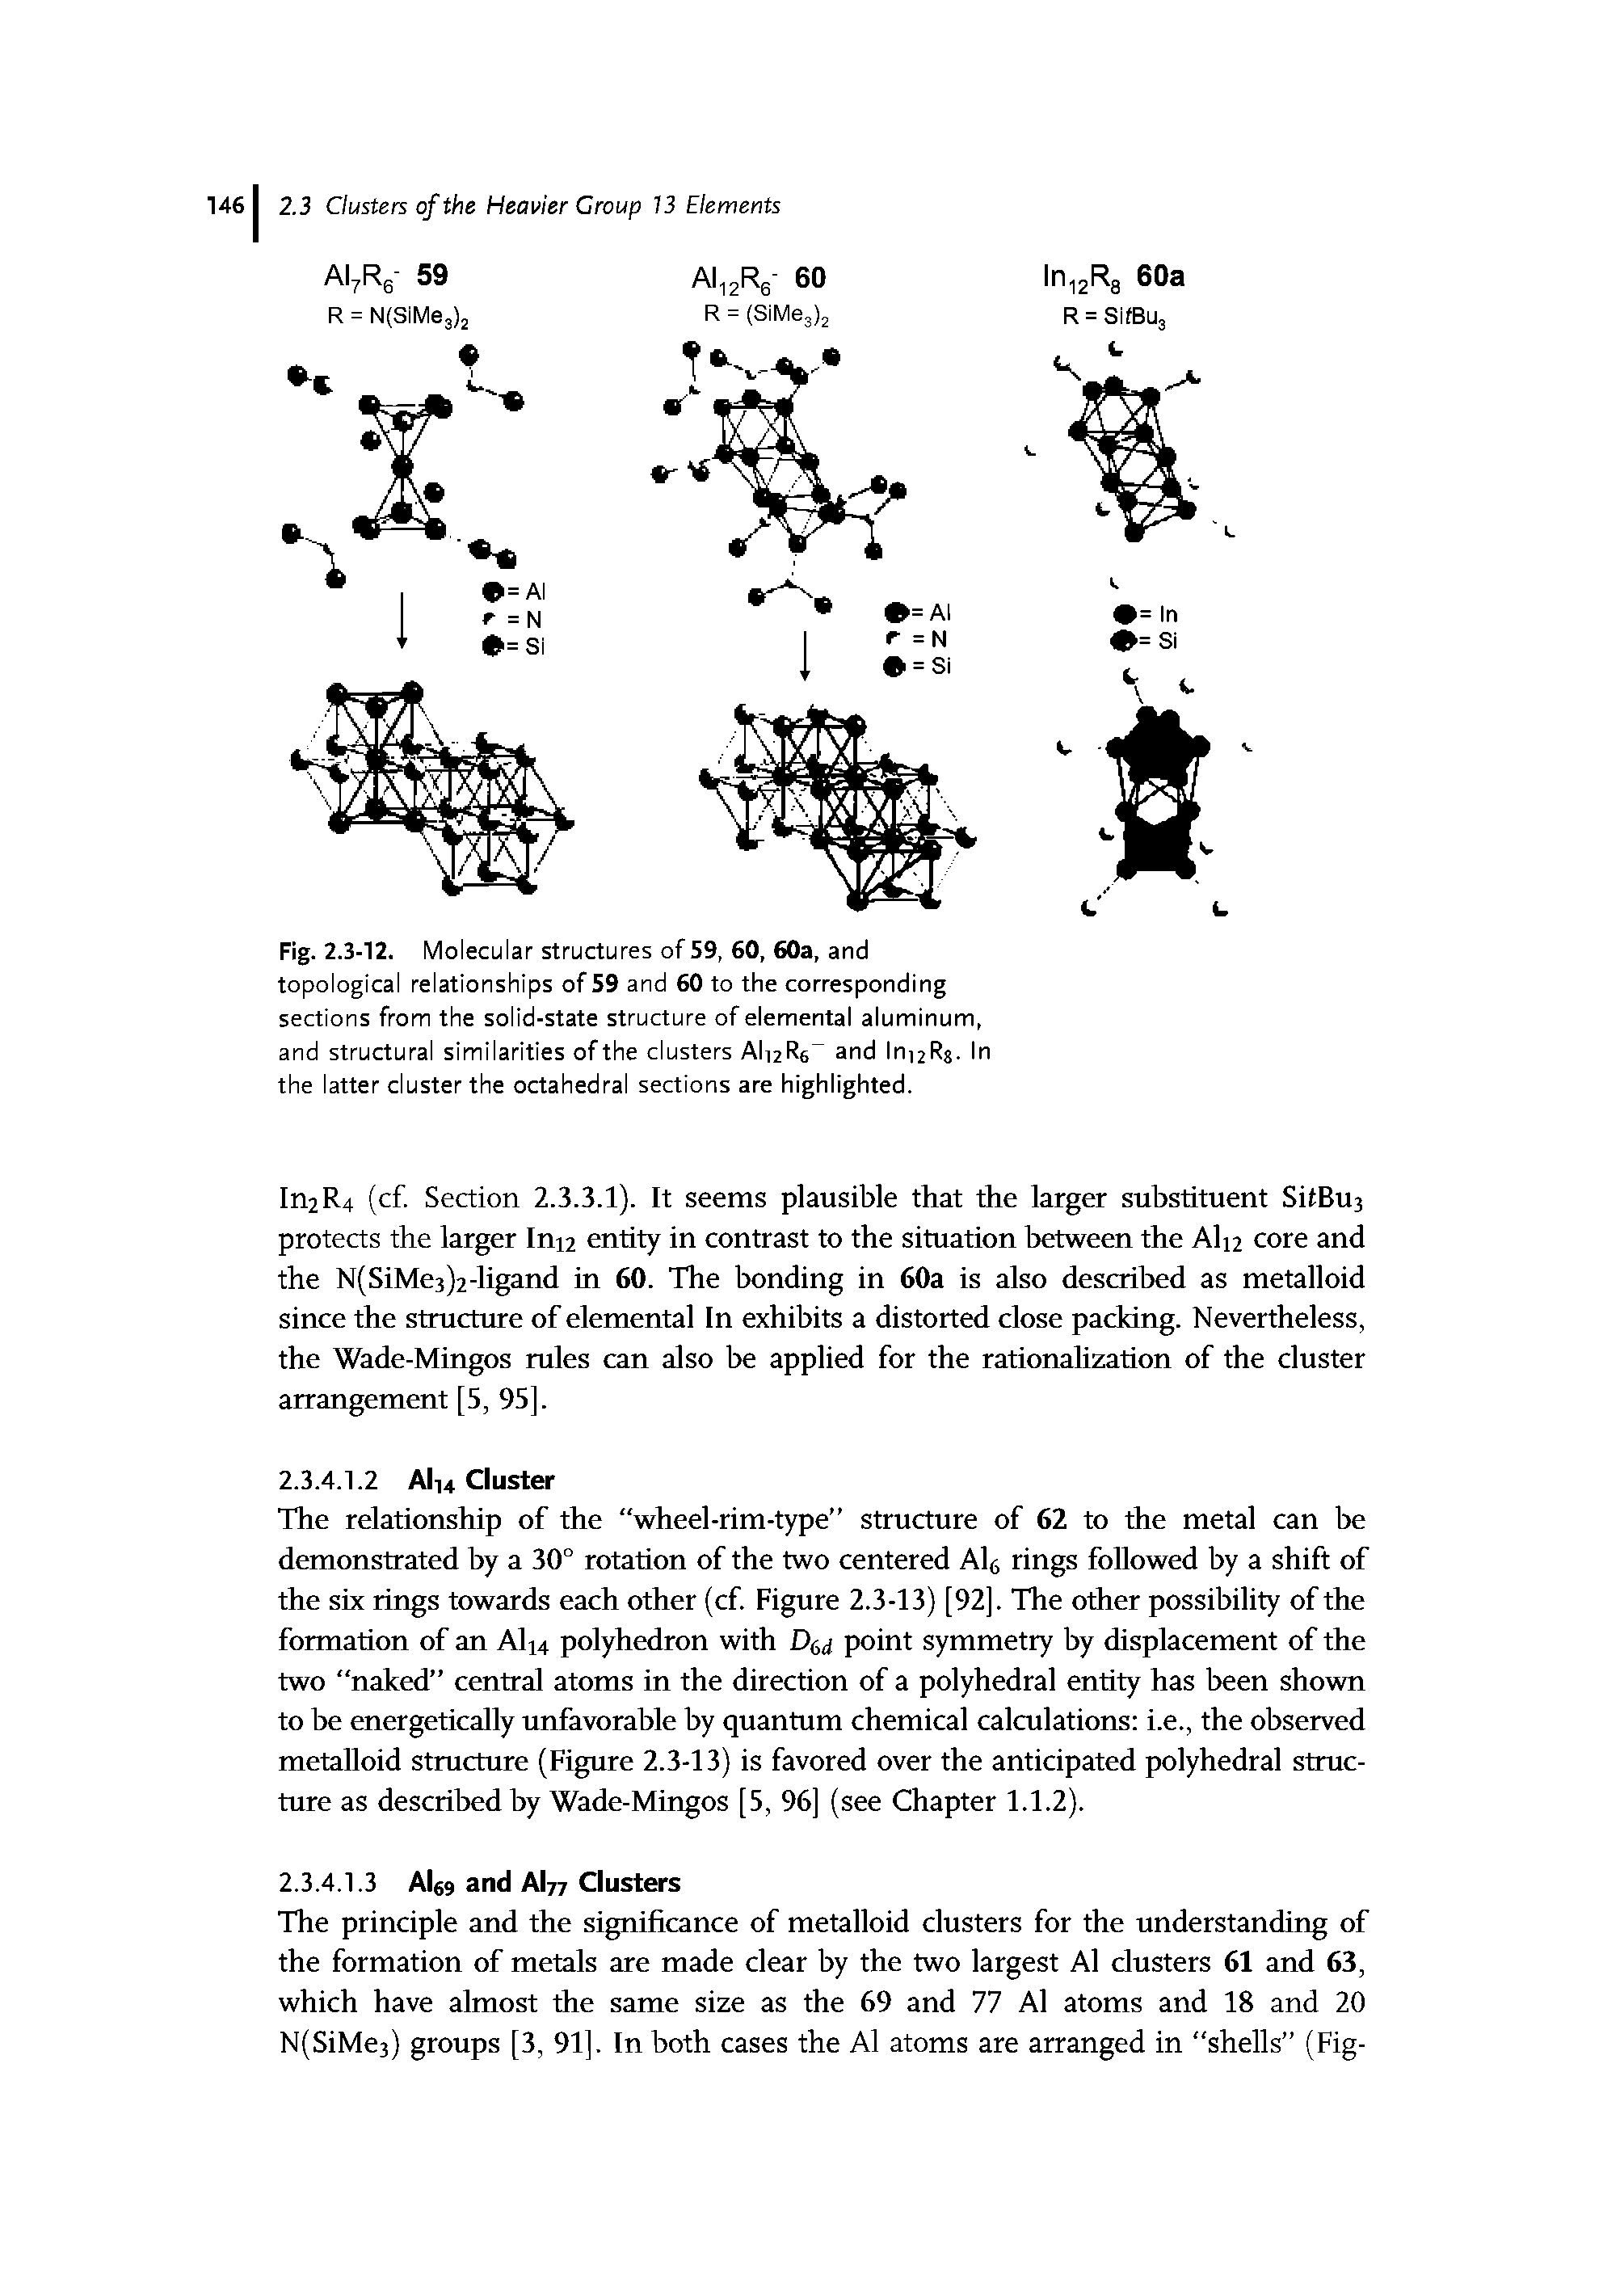 Fig. 2.3-12. Molecular structures of 59, 60, 60a, and topological relationships of 59 and 60 to the corresponding sections from the solid-state structure of elemental aluminum, and structural similarities of the clusters Ali2R6 and In Rs- In the latter cluster the octahedral sections are highlighted.